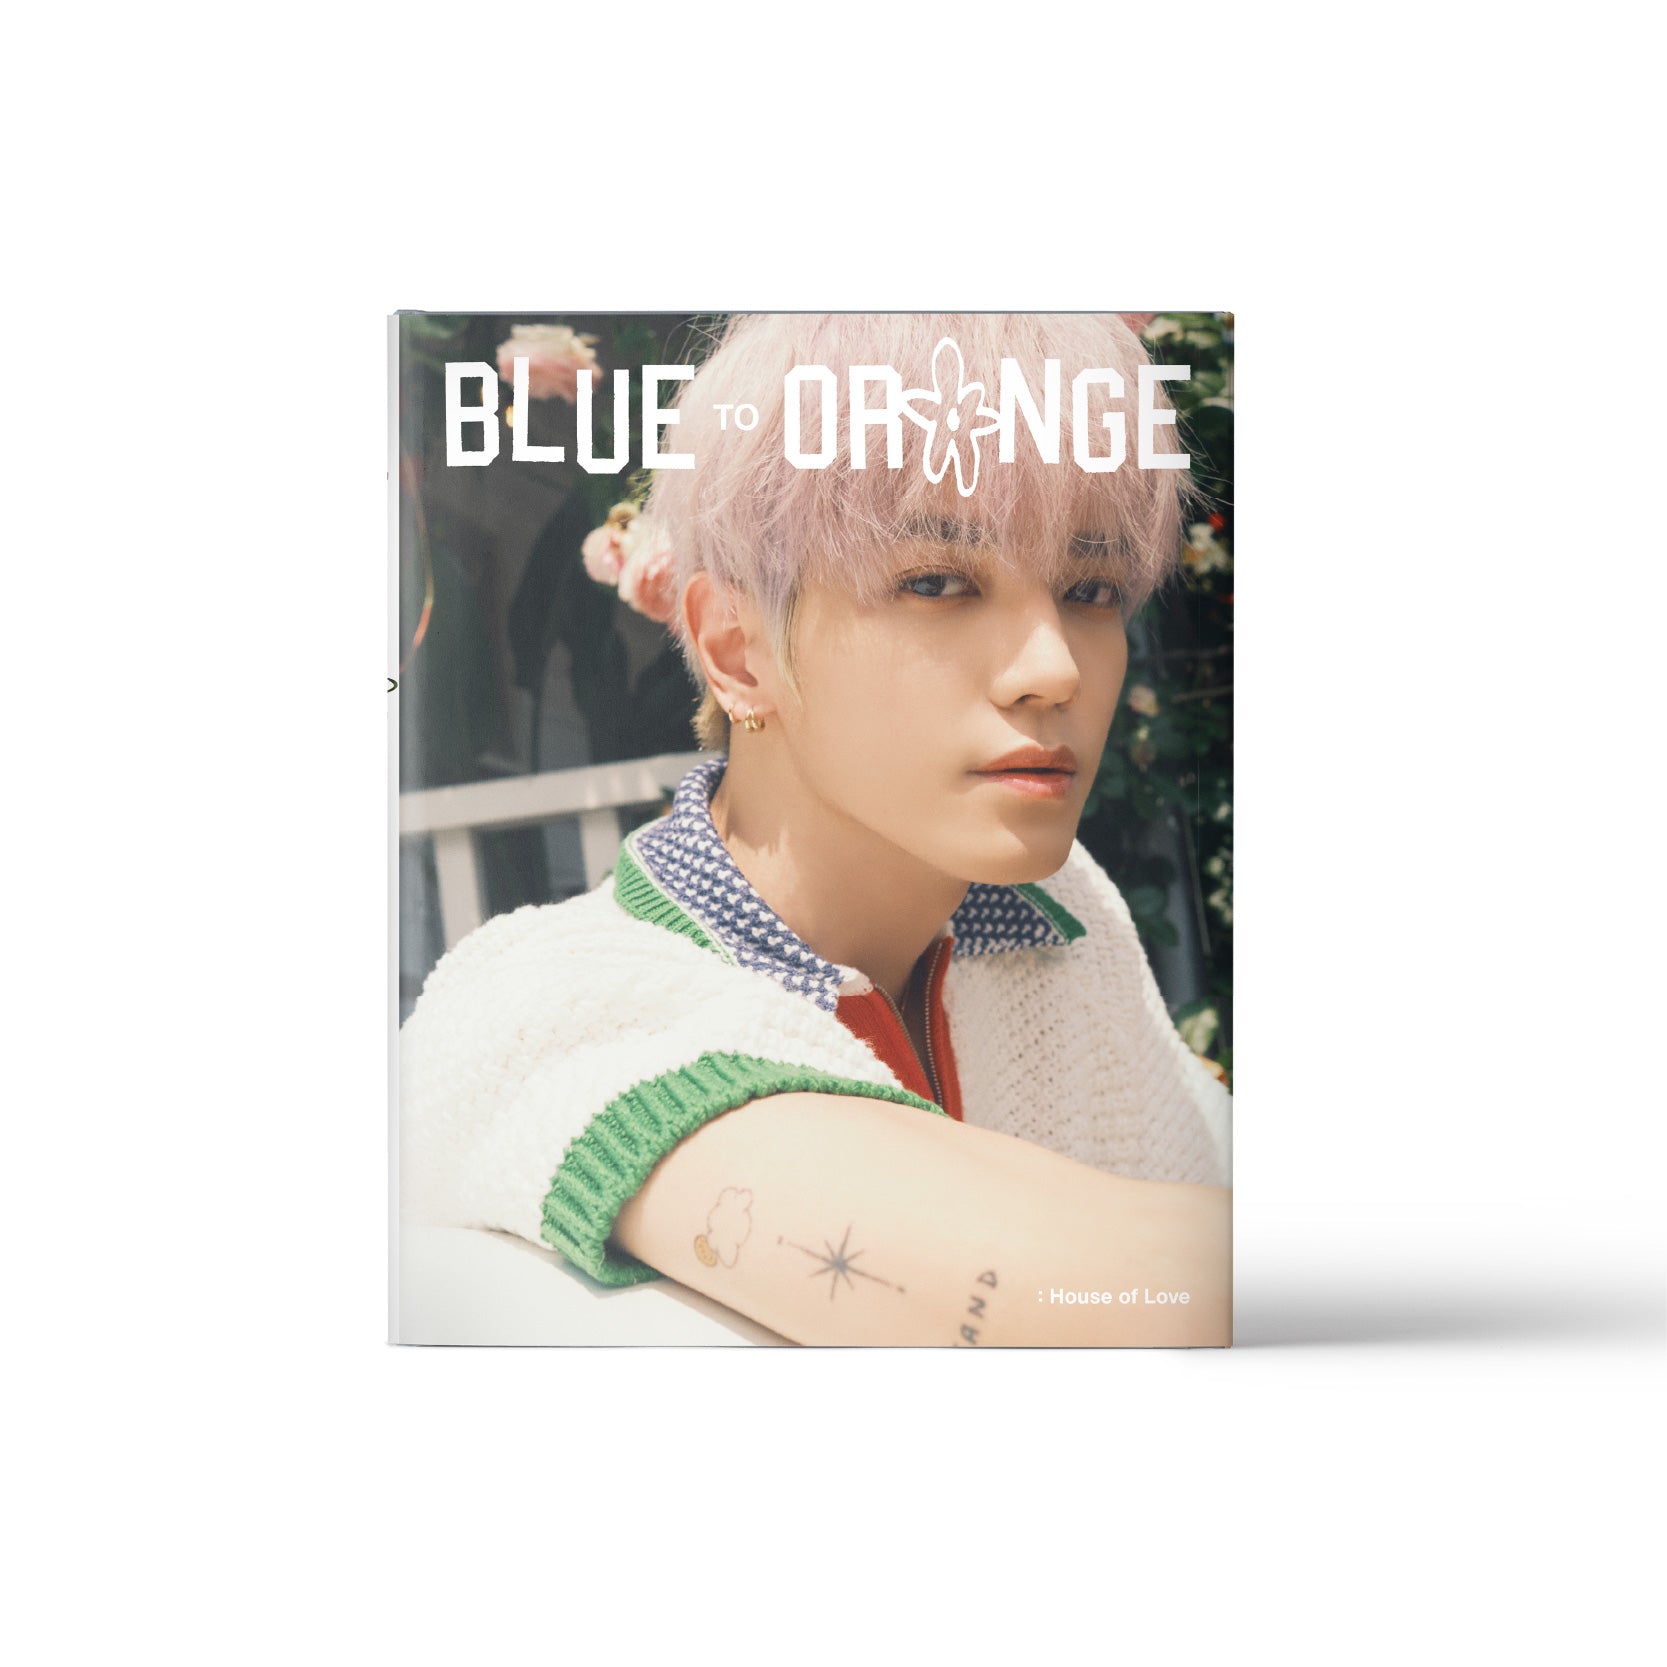 NCT 127 TAEYONG - BLUE TO ORANGE : House of Love (PHOTOBOOK)